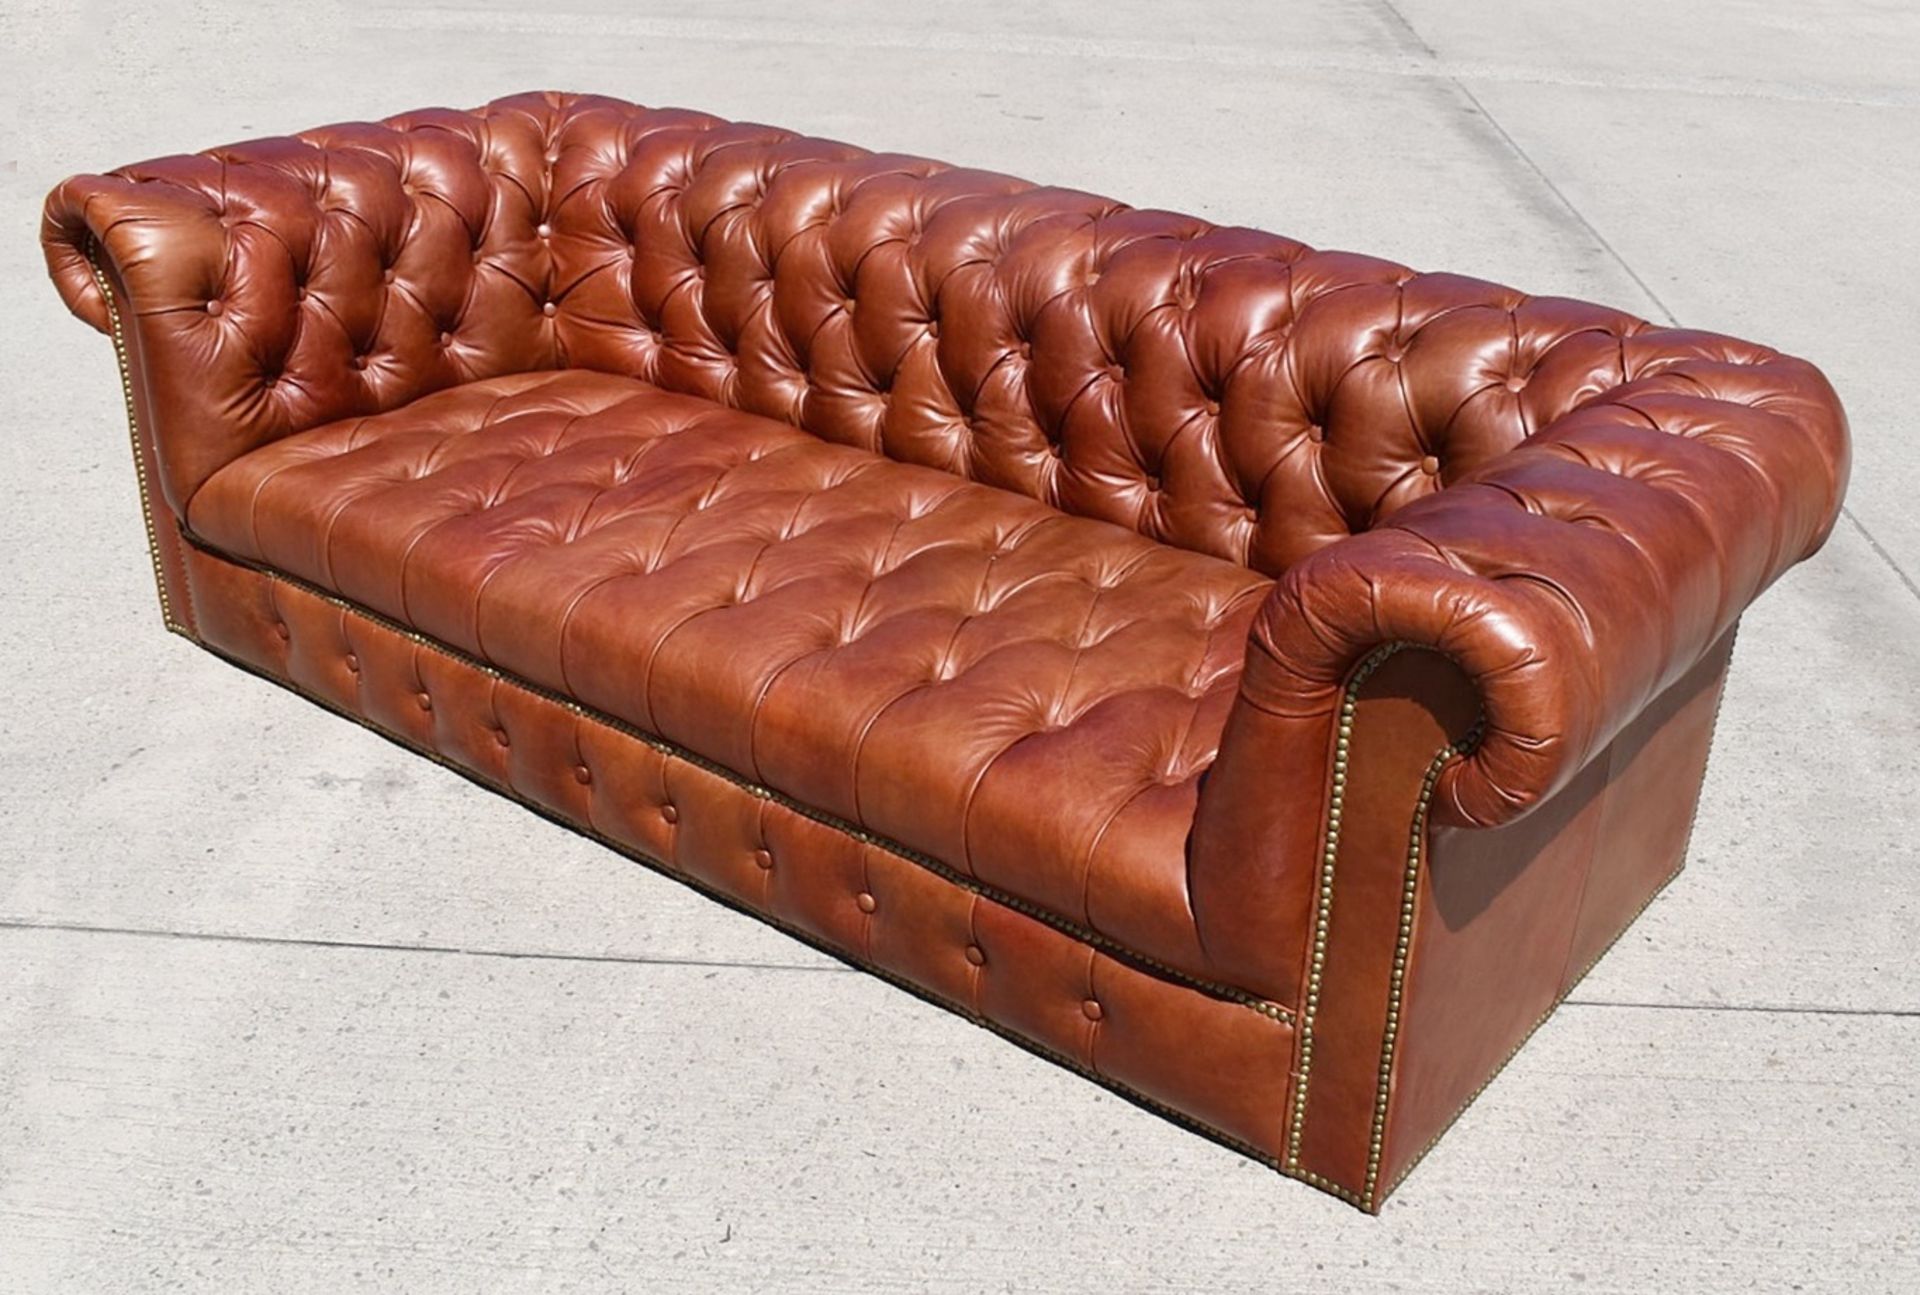 1 x TIMOTHY OULTON 'Westminster' Luxury Leather Button Sofa 2.5 Seater - Original Price £6,495 - Image 2 of 19